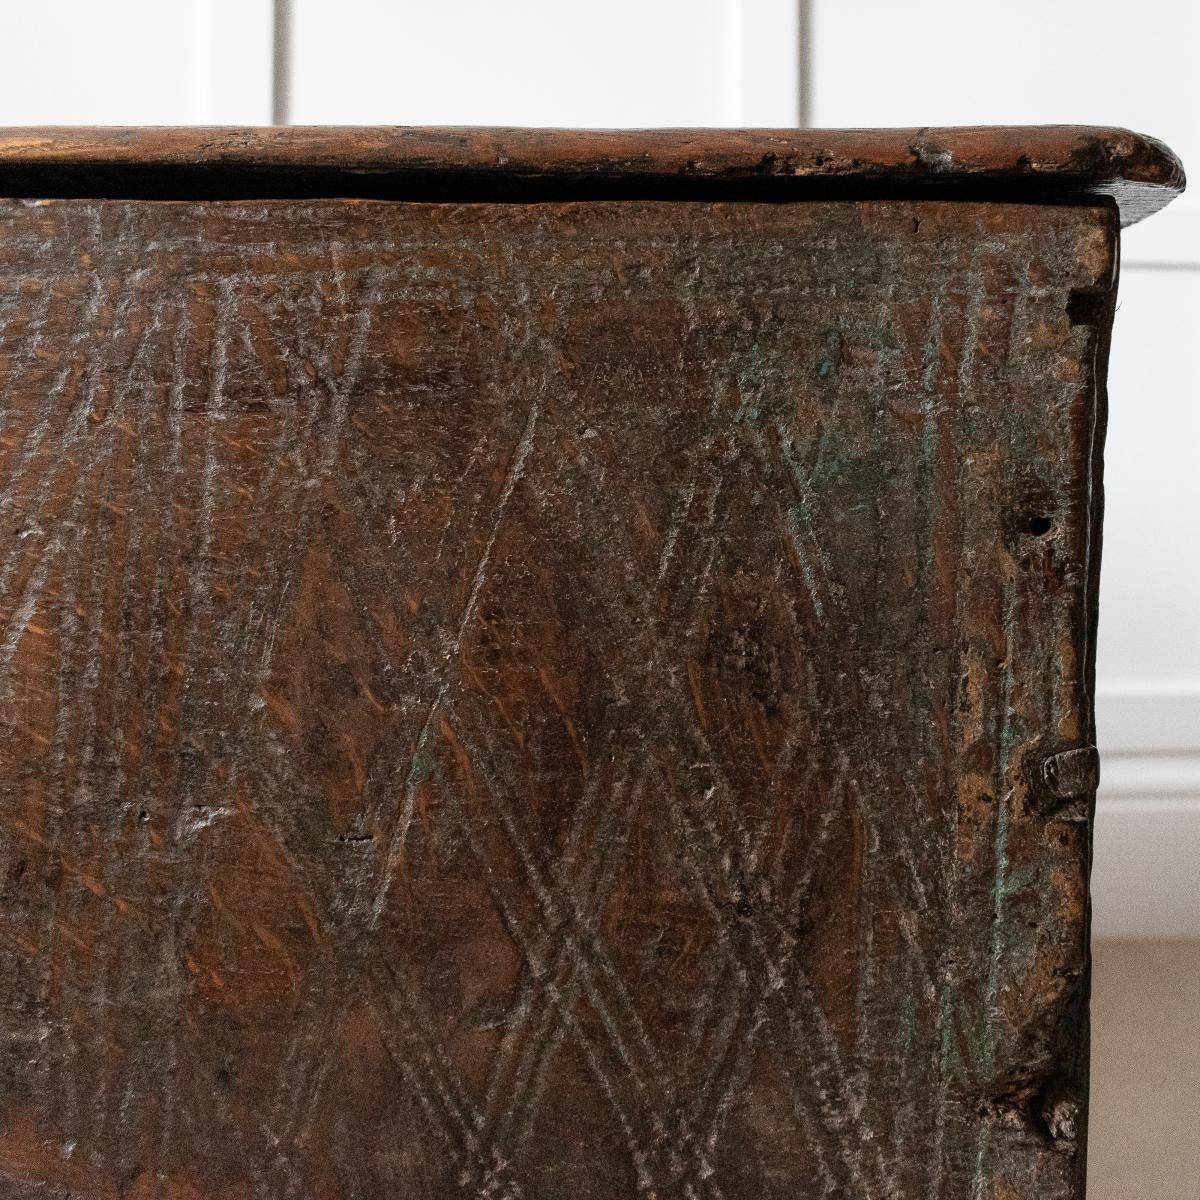 A rare Henry VIII boarded elm, oak and polychrome-decorated chest, circa 1520-30